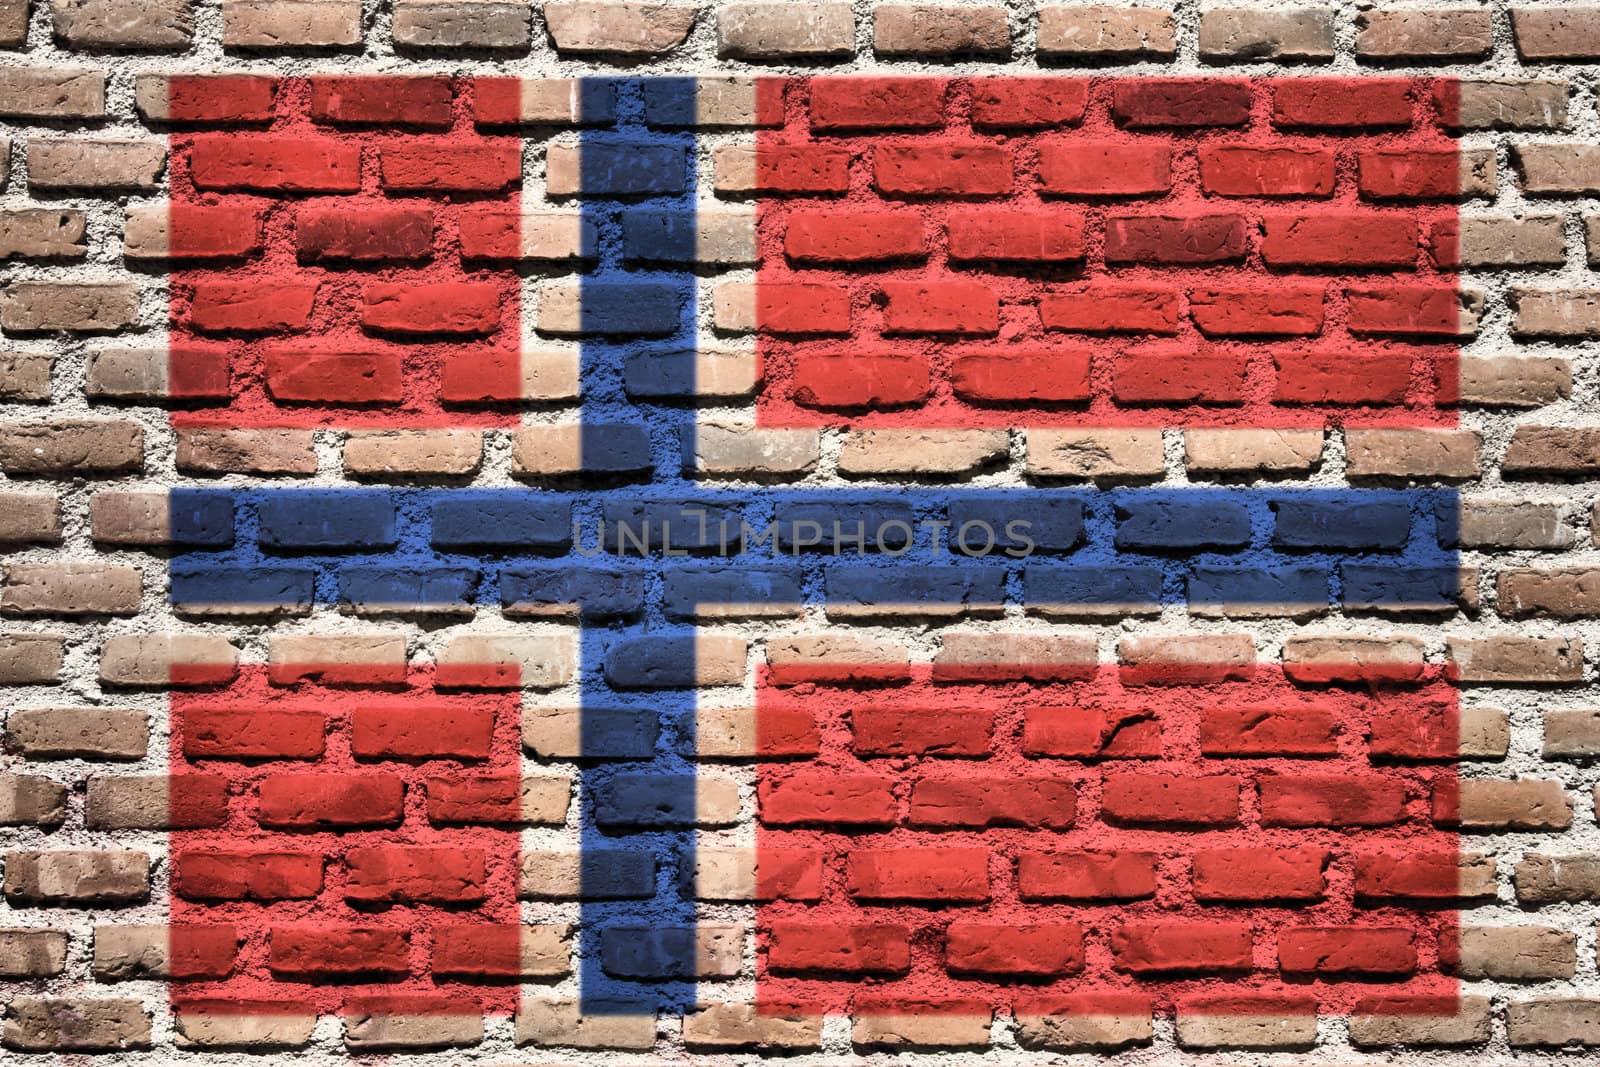 Norway national flag spray painted on a brick wall. Grunge graffiti.